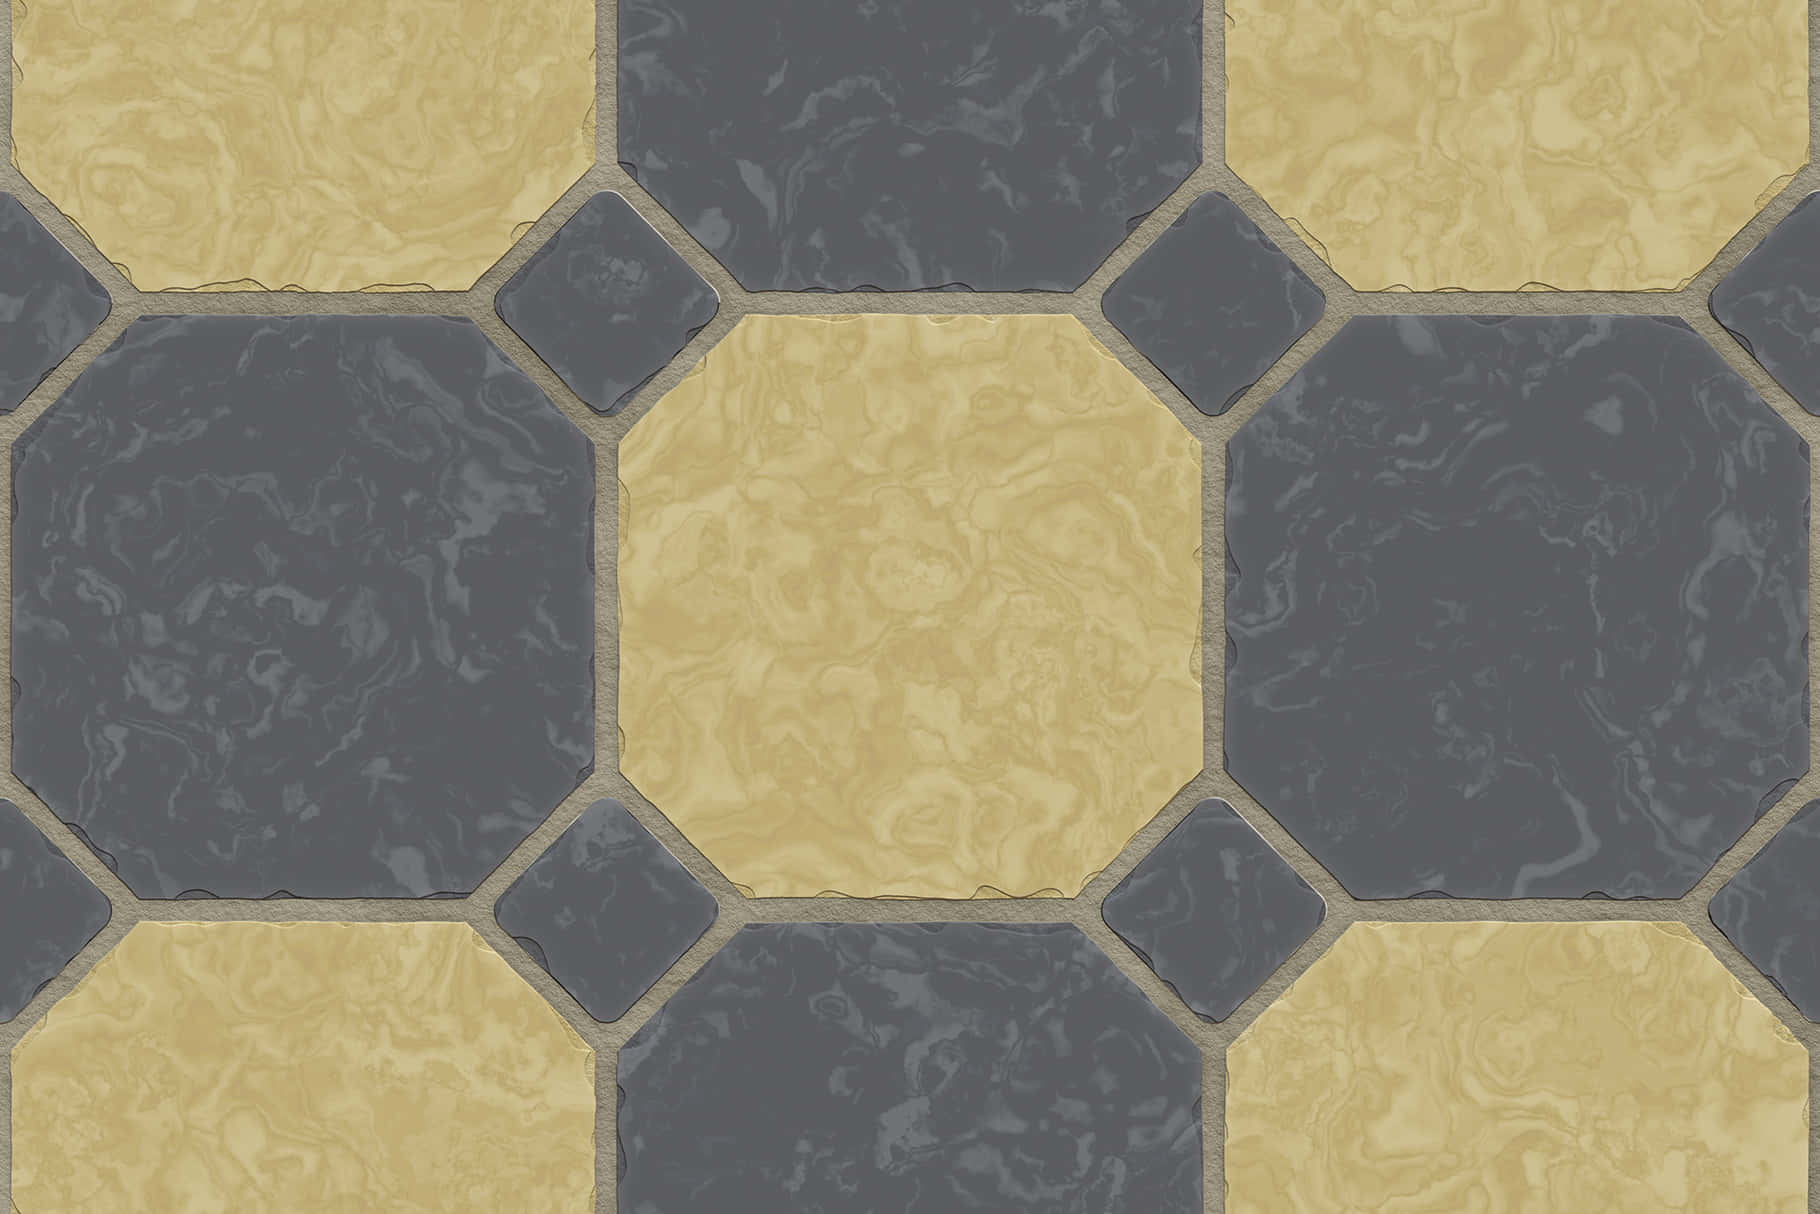 A Tiled Floor With Gold And Black Tiles